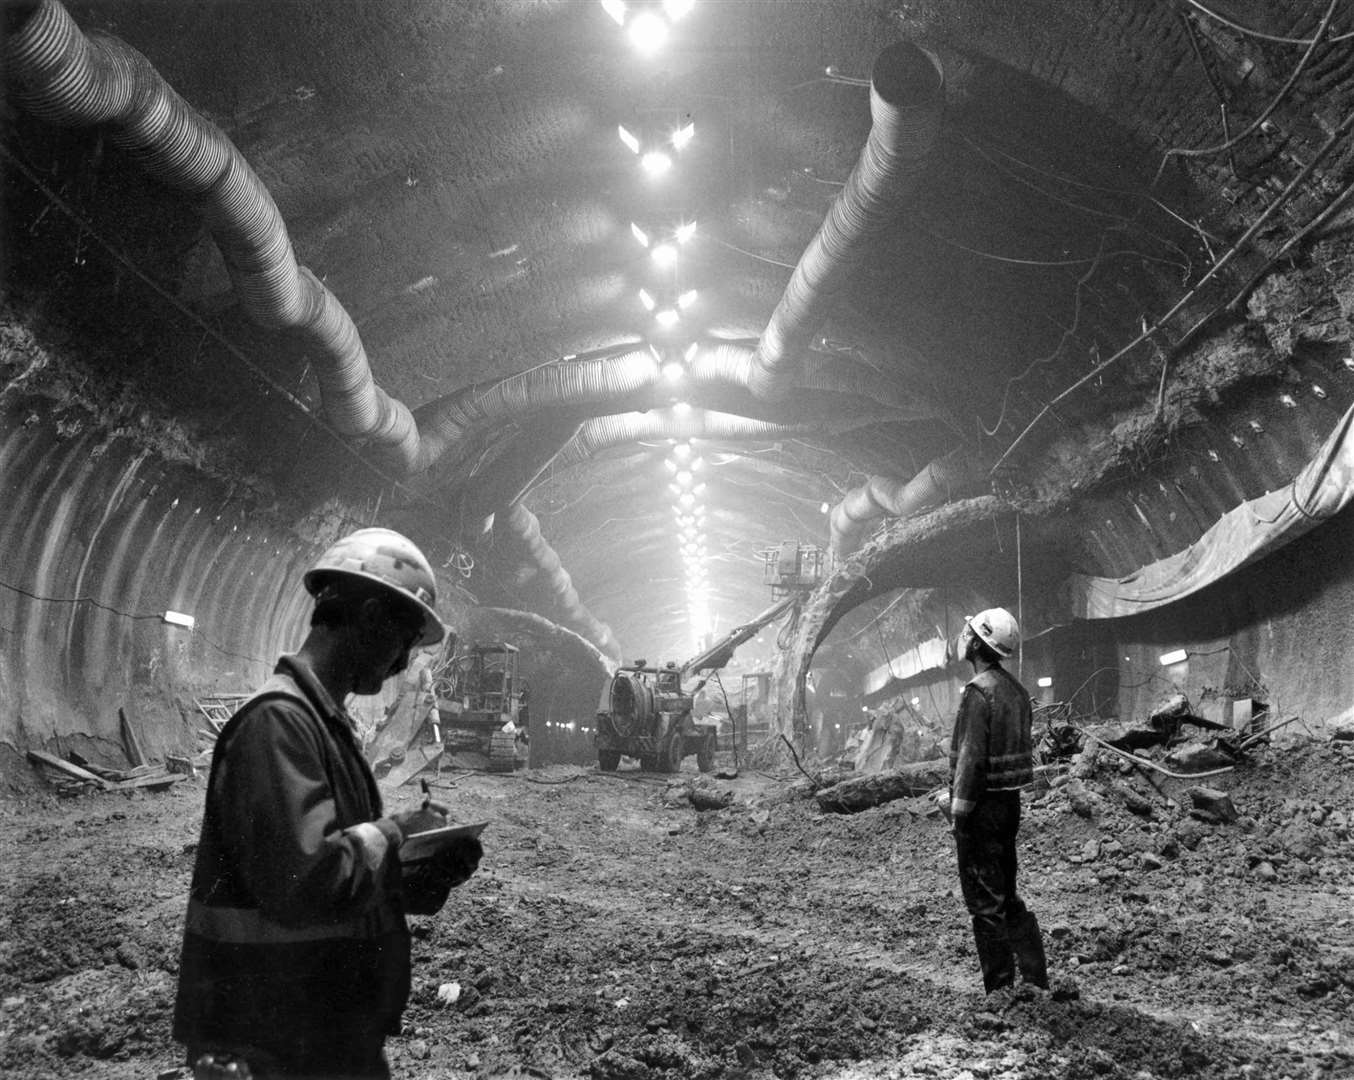 The Channel tunnel under construction. Enough rubble to fill Wembley Stadium 13 times was excavated during construction